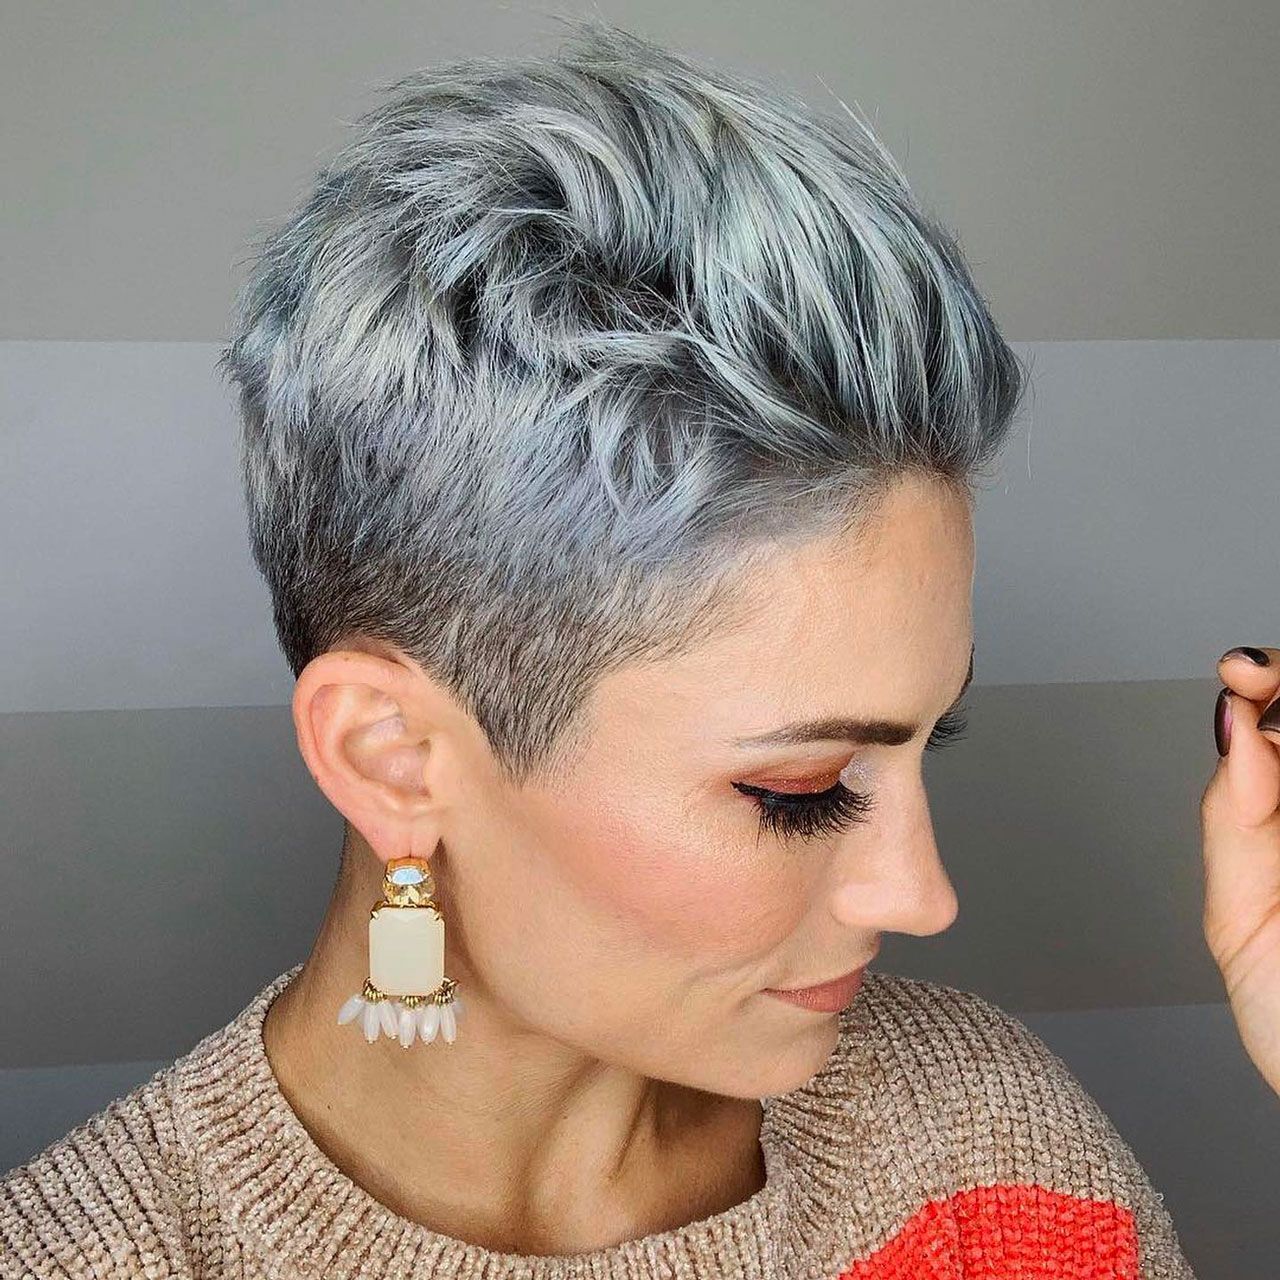 Stylists showed the best hairstyles for women with thin hair: perfect for those over 40